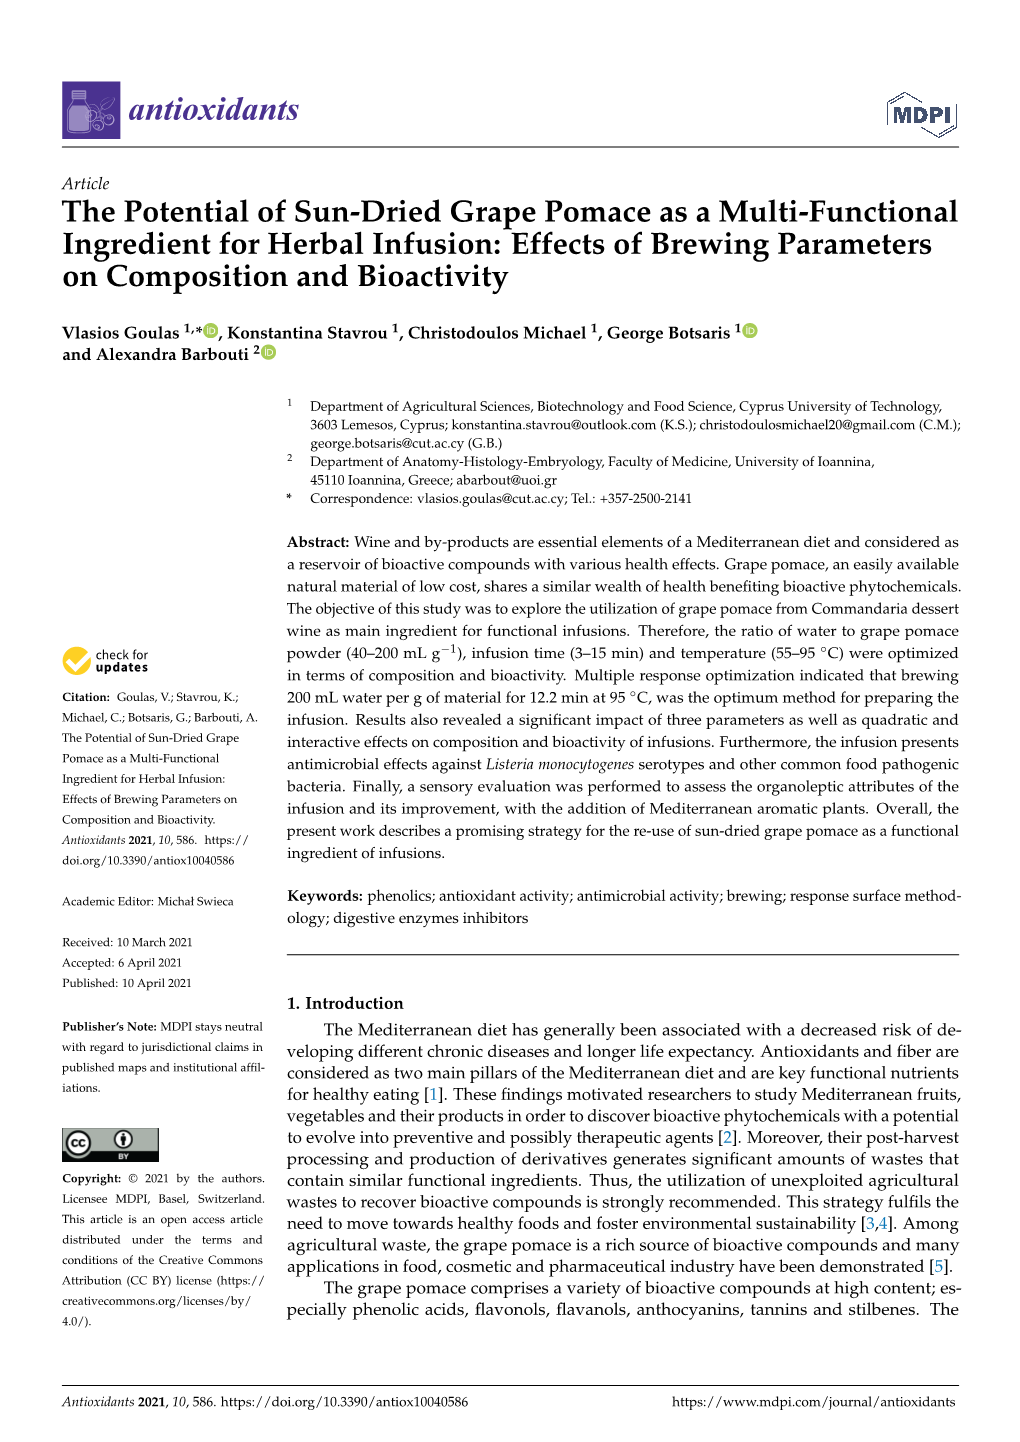 The Potential of Sun-Dried Grape Pomace As a Multi-Functional Ingredient for Herbal Infusion: Effects of Brewing Parameters on Composition and Bioactivity